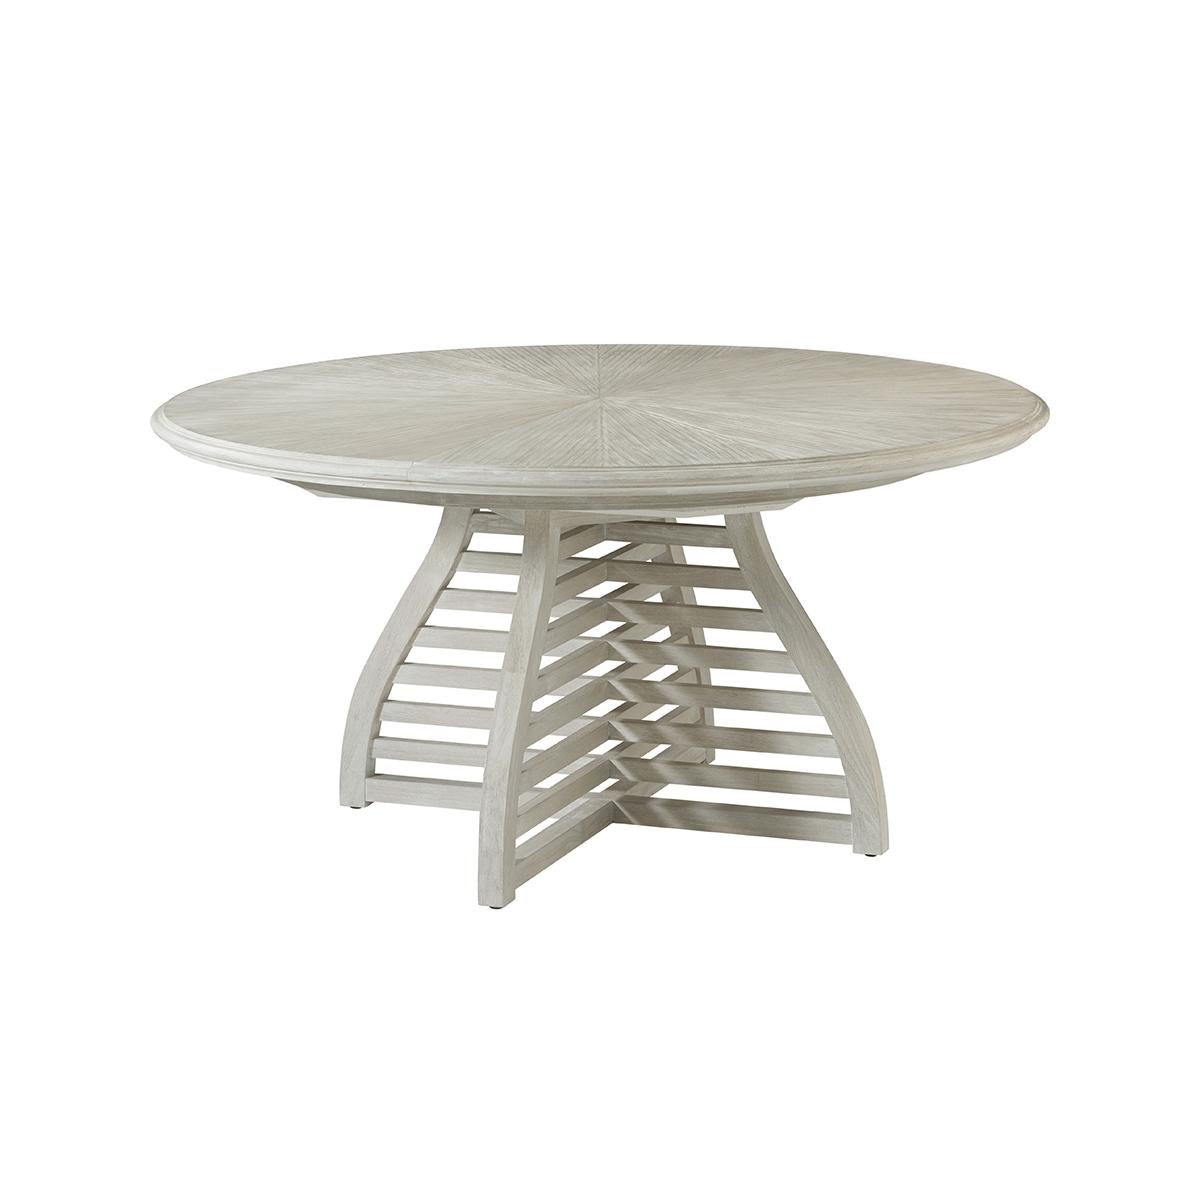 Modern Extending Dining Table, functional and visually appealing, the slatted dining table is the perfect dining table for your party. This uniquely designed table reflects a sunburst patterned top with a shaped slatted base. With a wire-brushed